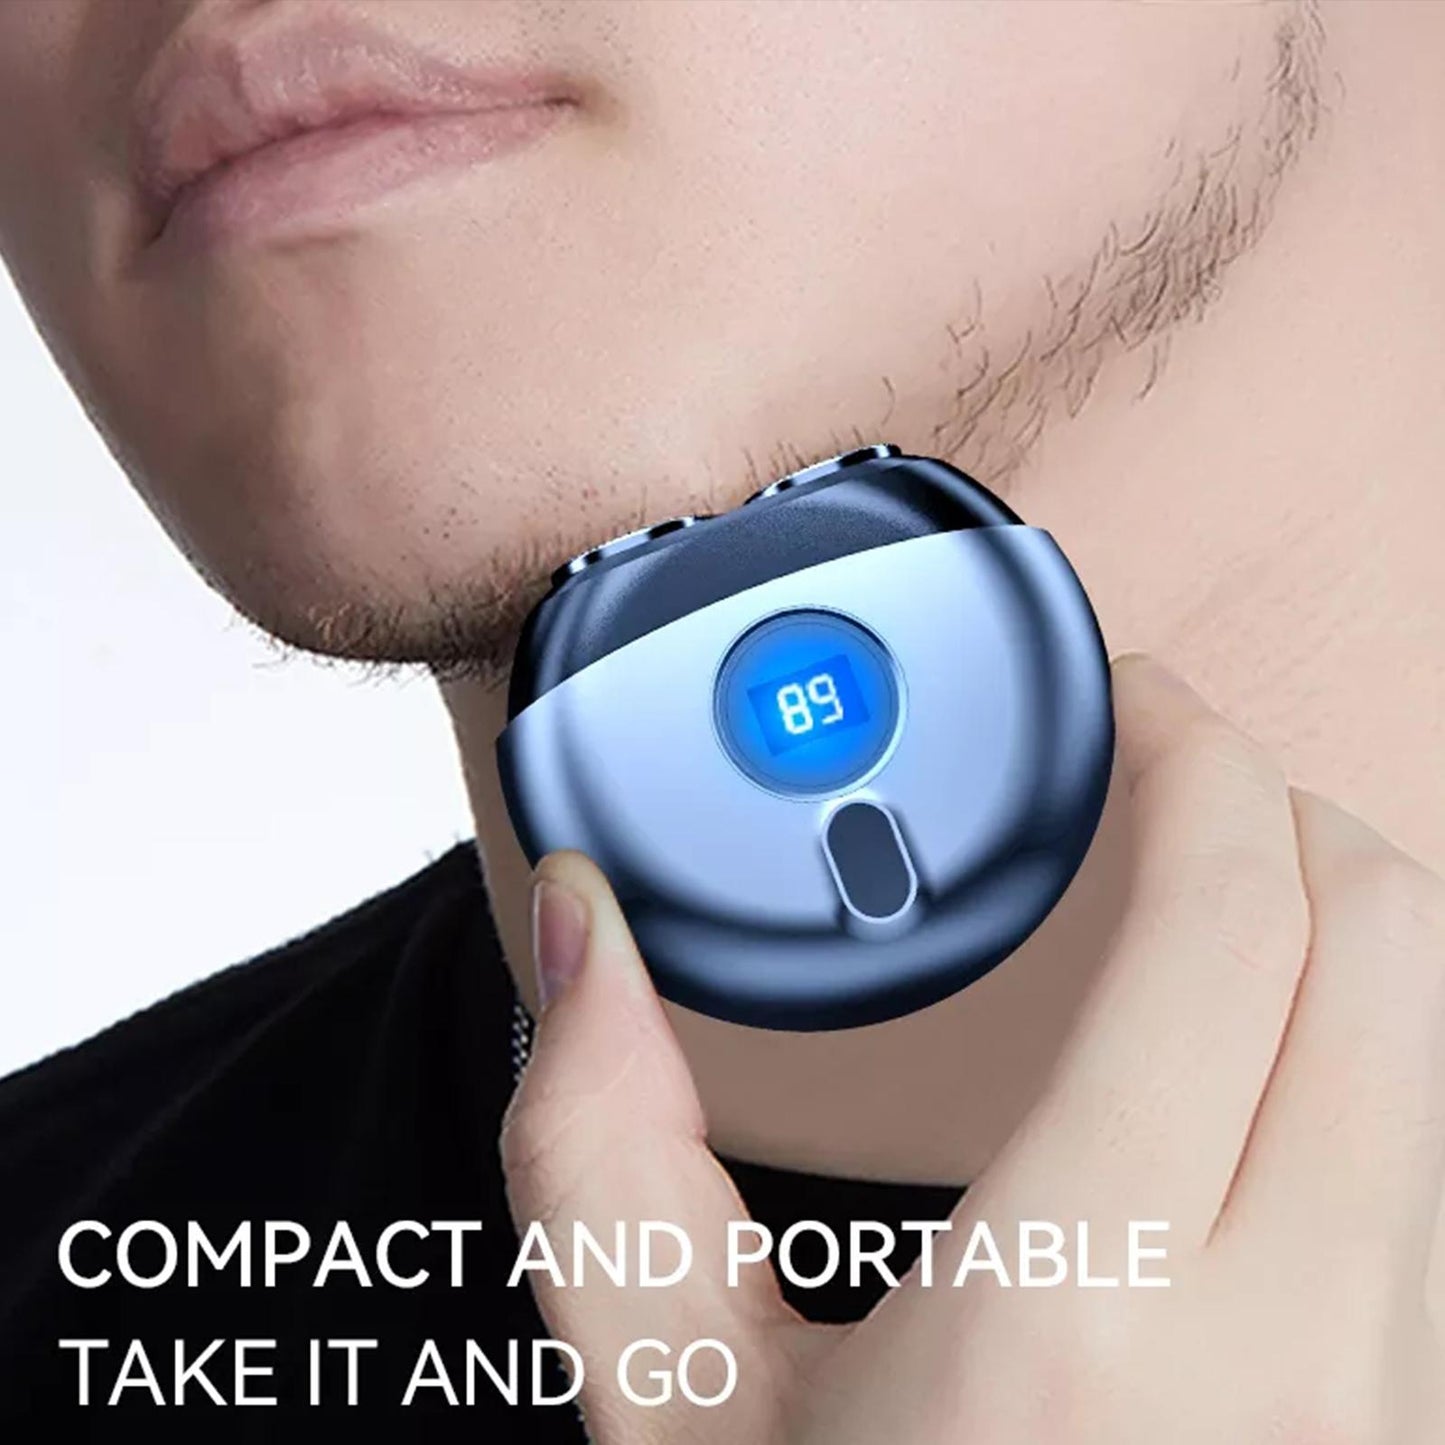 Mini USB Rechargeable Electric Shaver Round Design Double Ring Waterproof Portable Quiet Men's Razor For Travel 2 Color